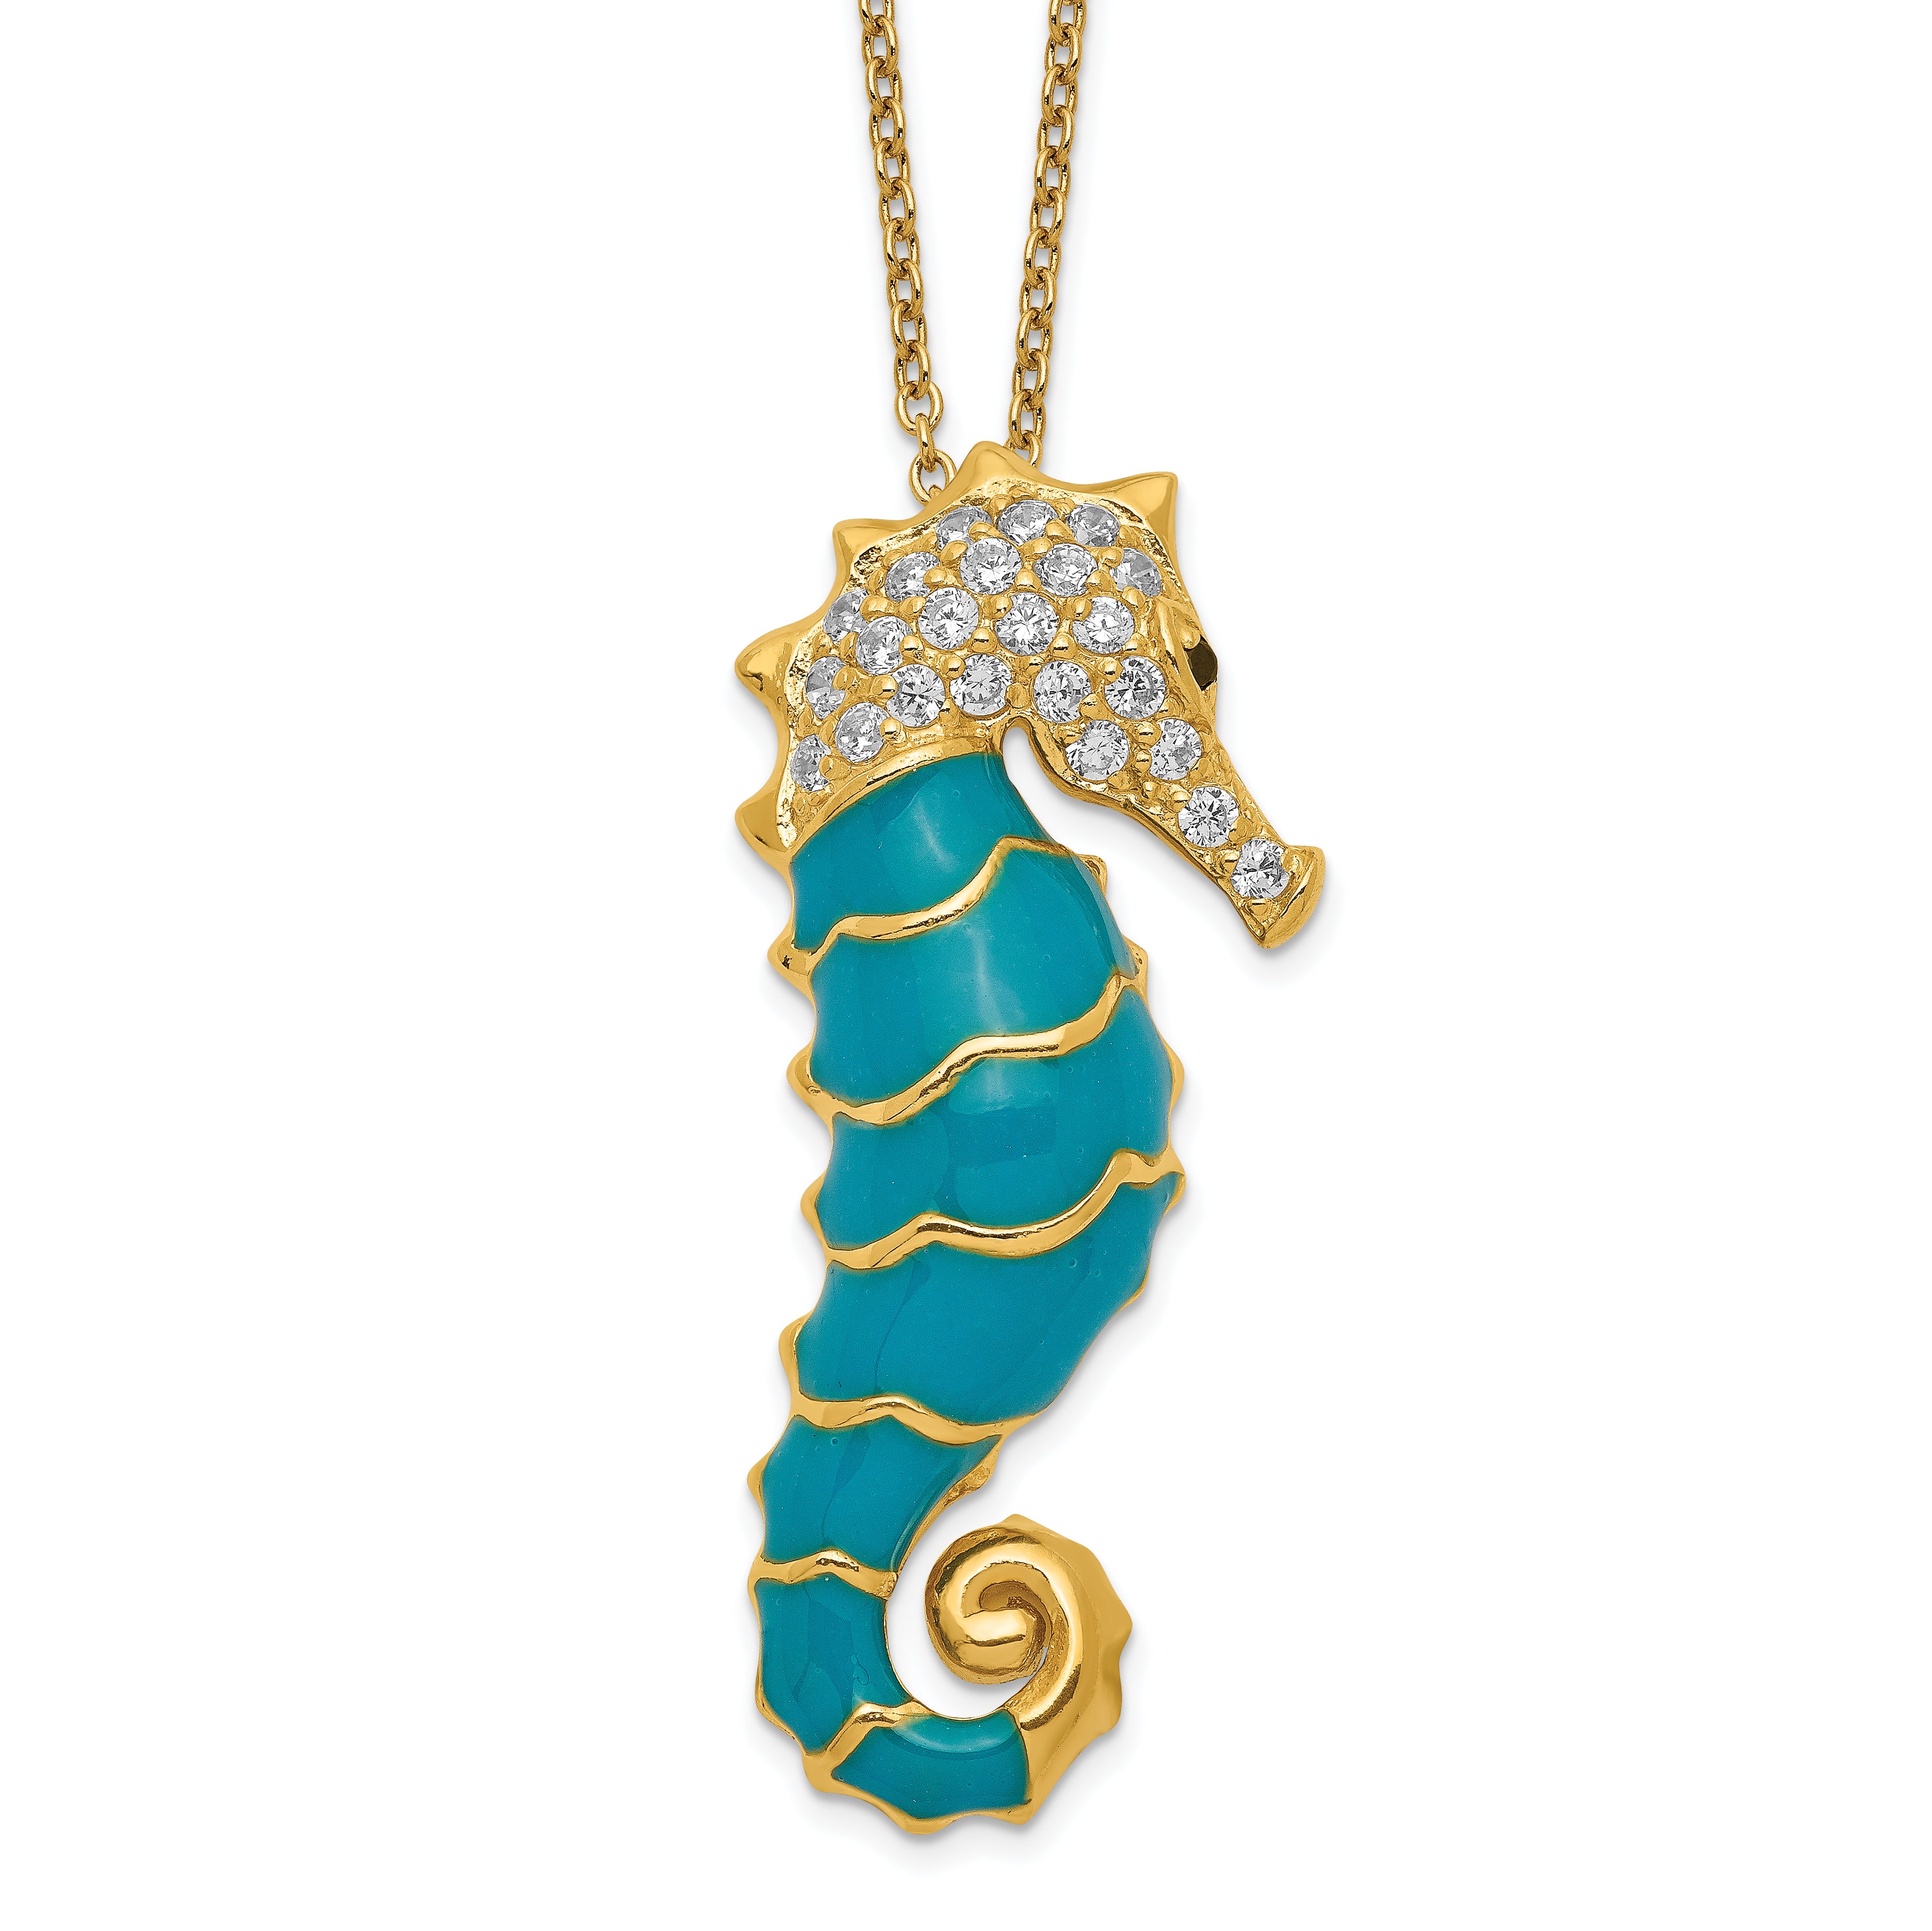 Cheryl M Sterling Silver Gold-plated Enameled Brilliant-cut Black and White CZ Seahorse 18 Inch Necklace